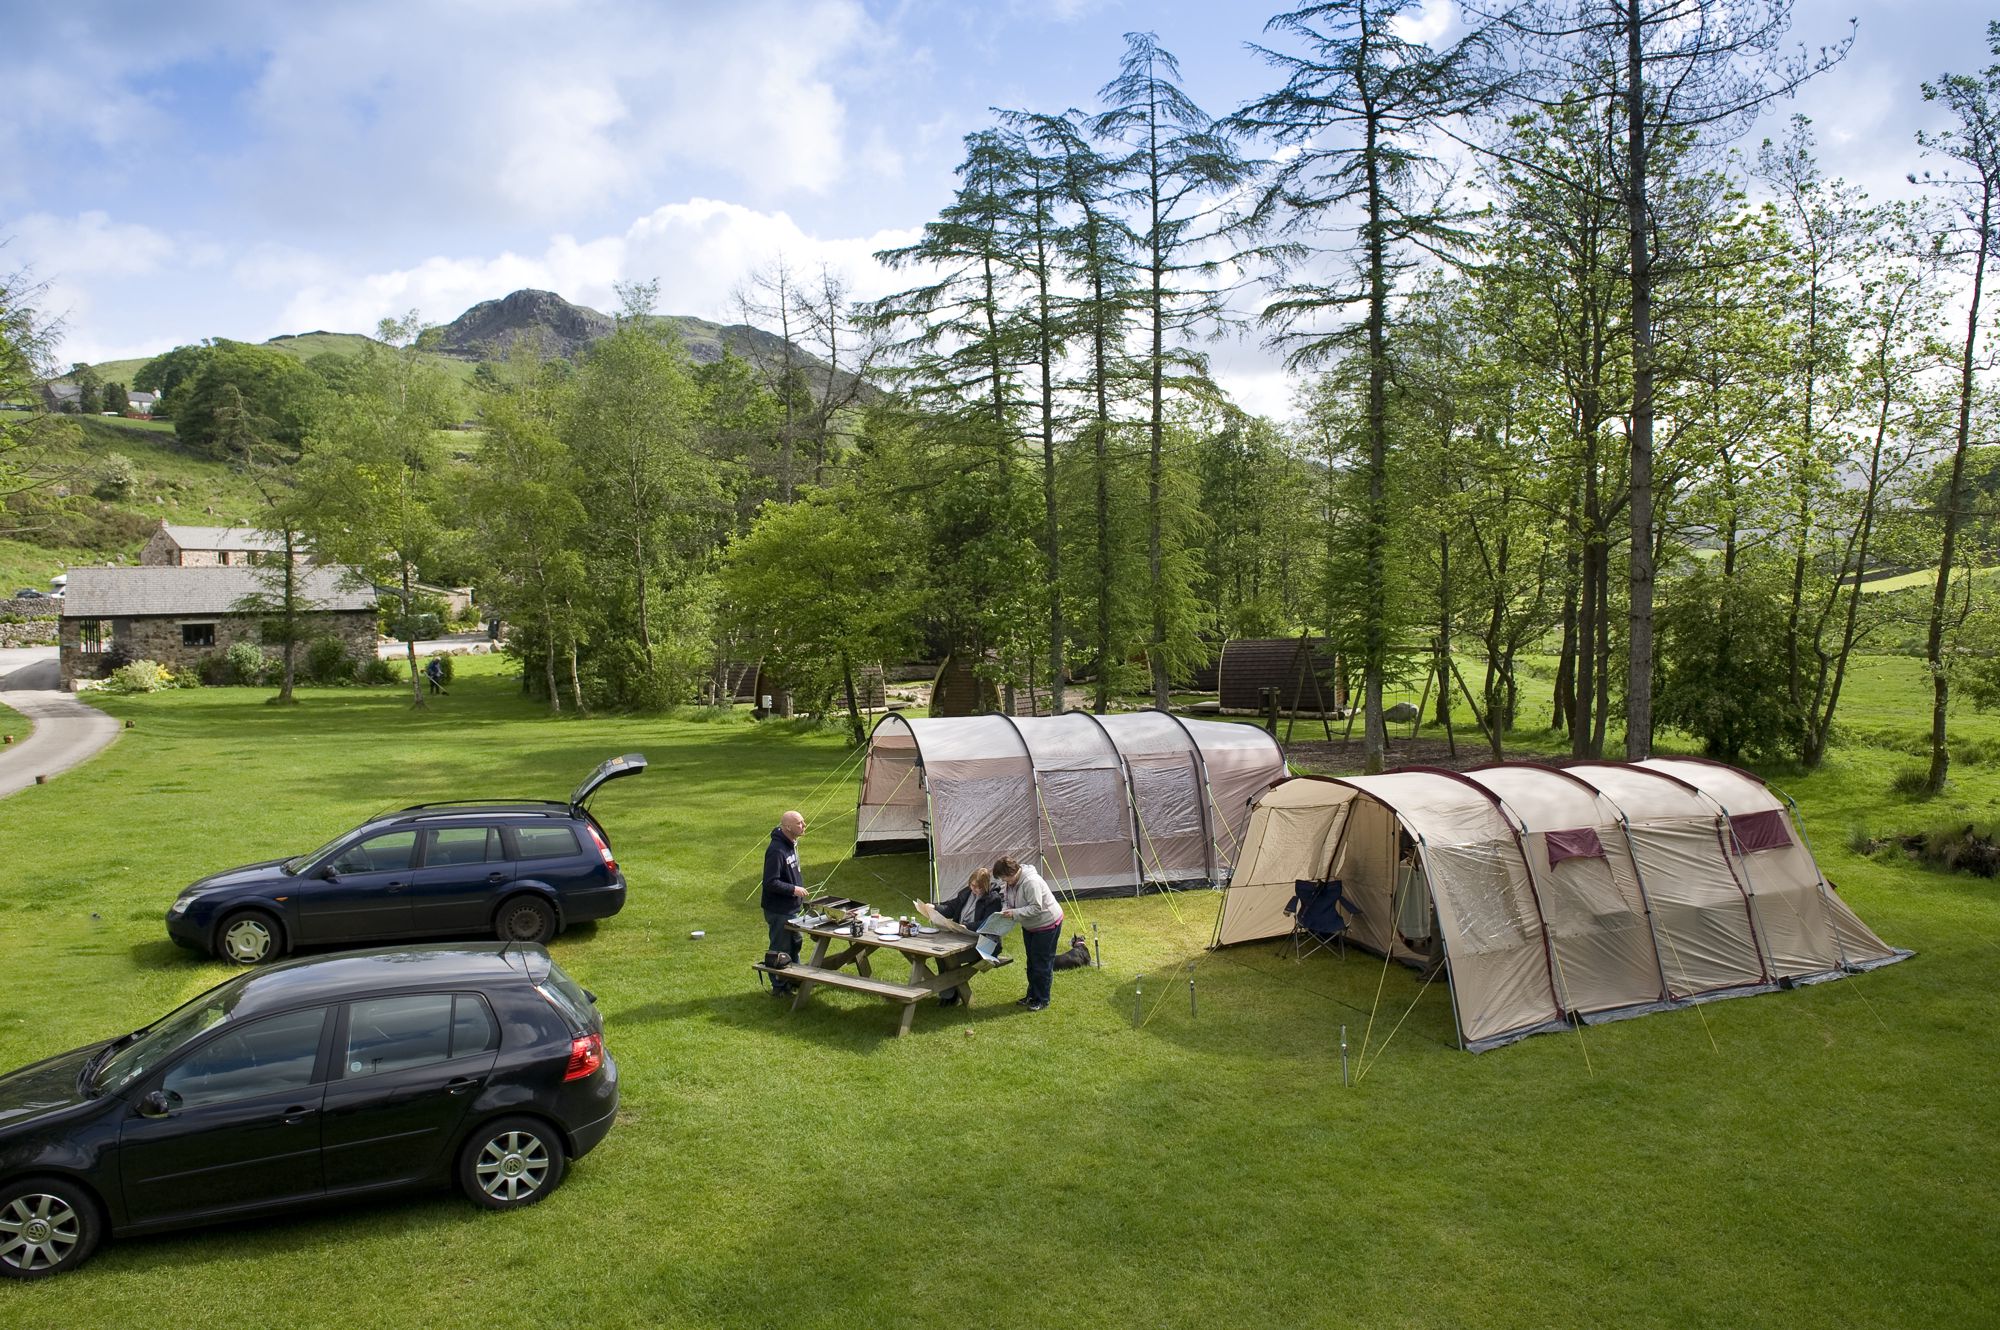 smaller motorhomes, tents, trailer tents and folding campers, the pitches a...